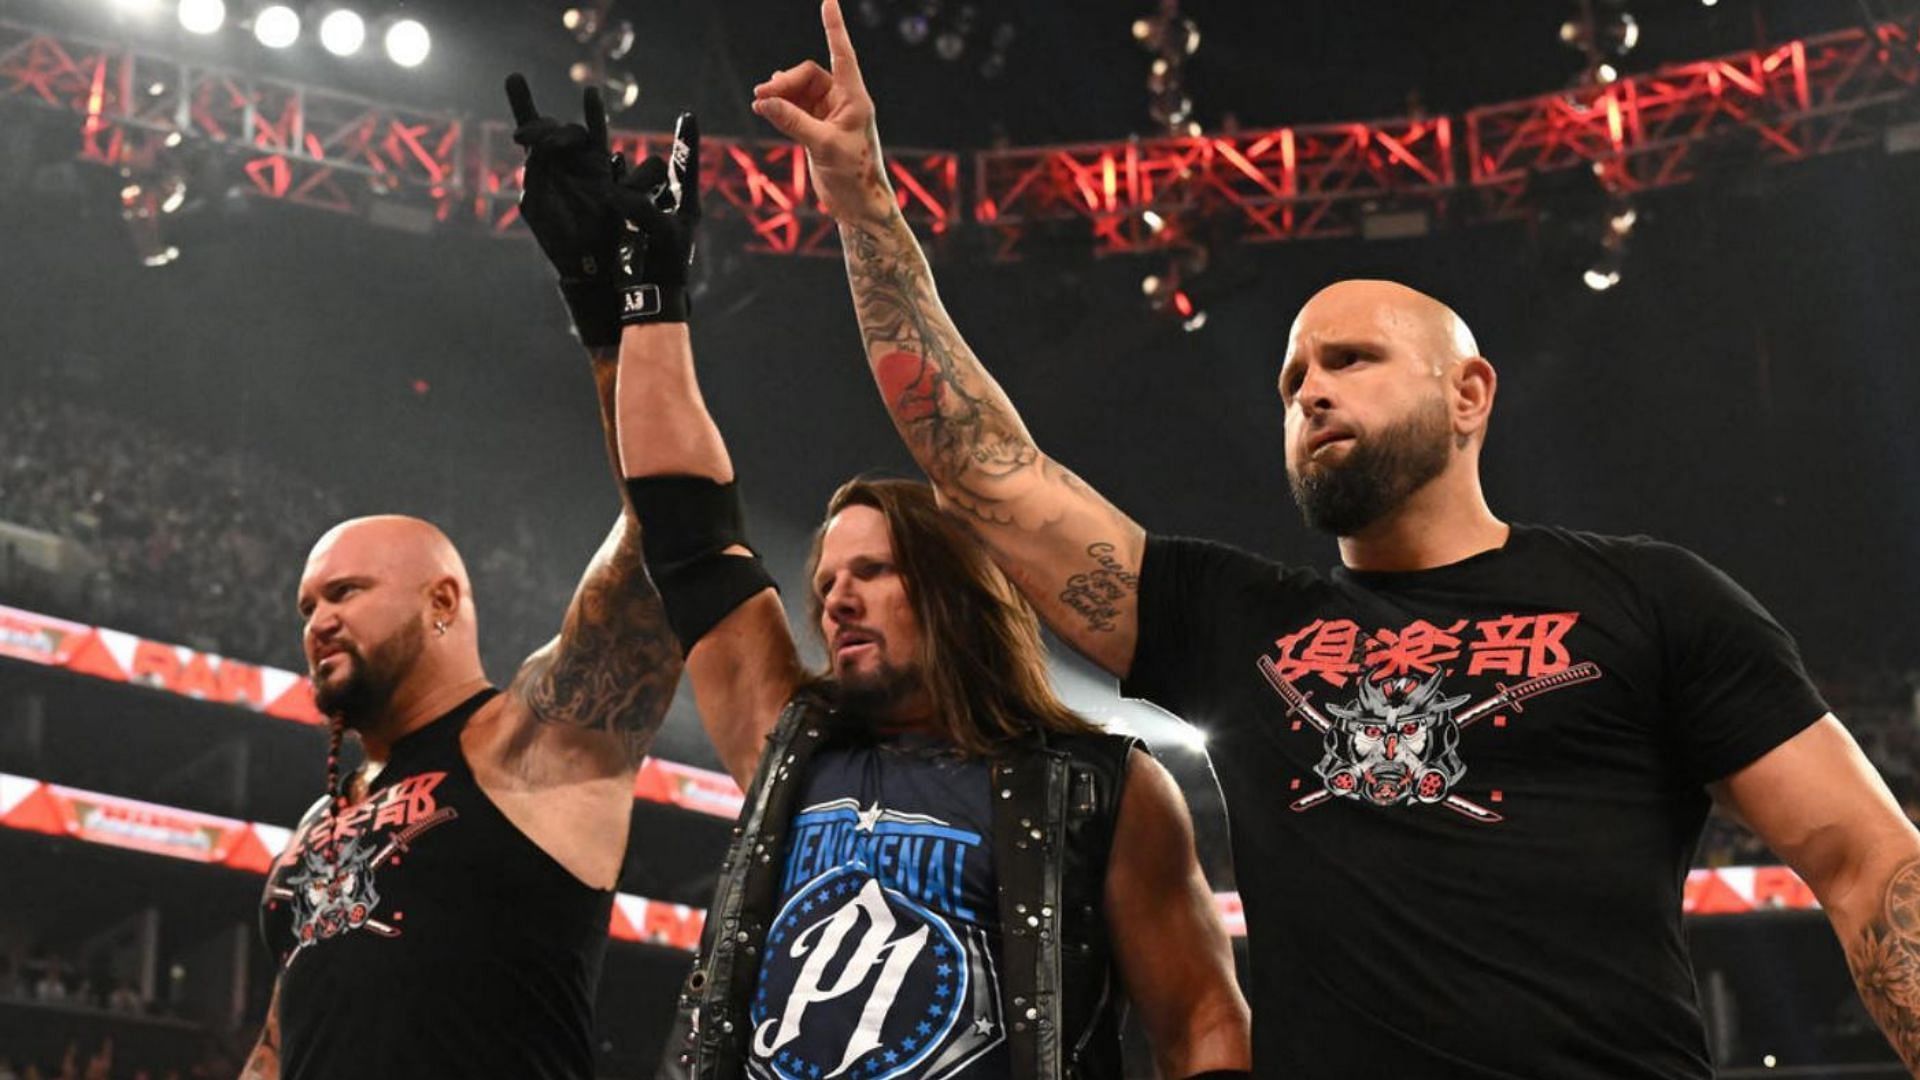 Luke Gallows &amp; Karl Anderson recently returned to WWE to reunite The OC